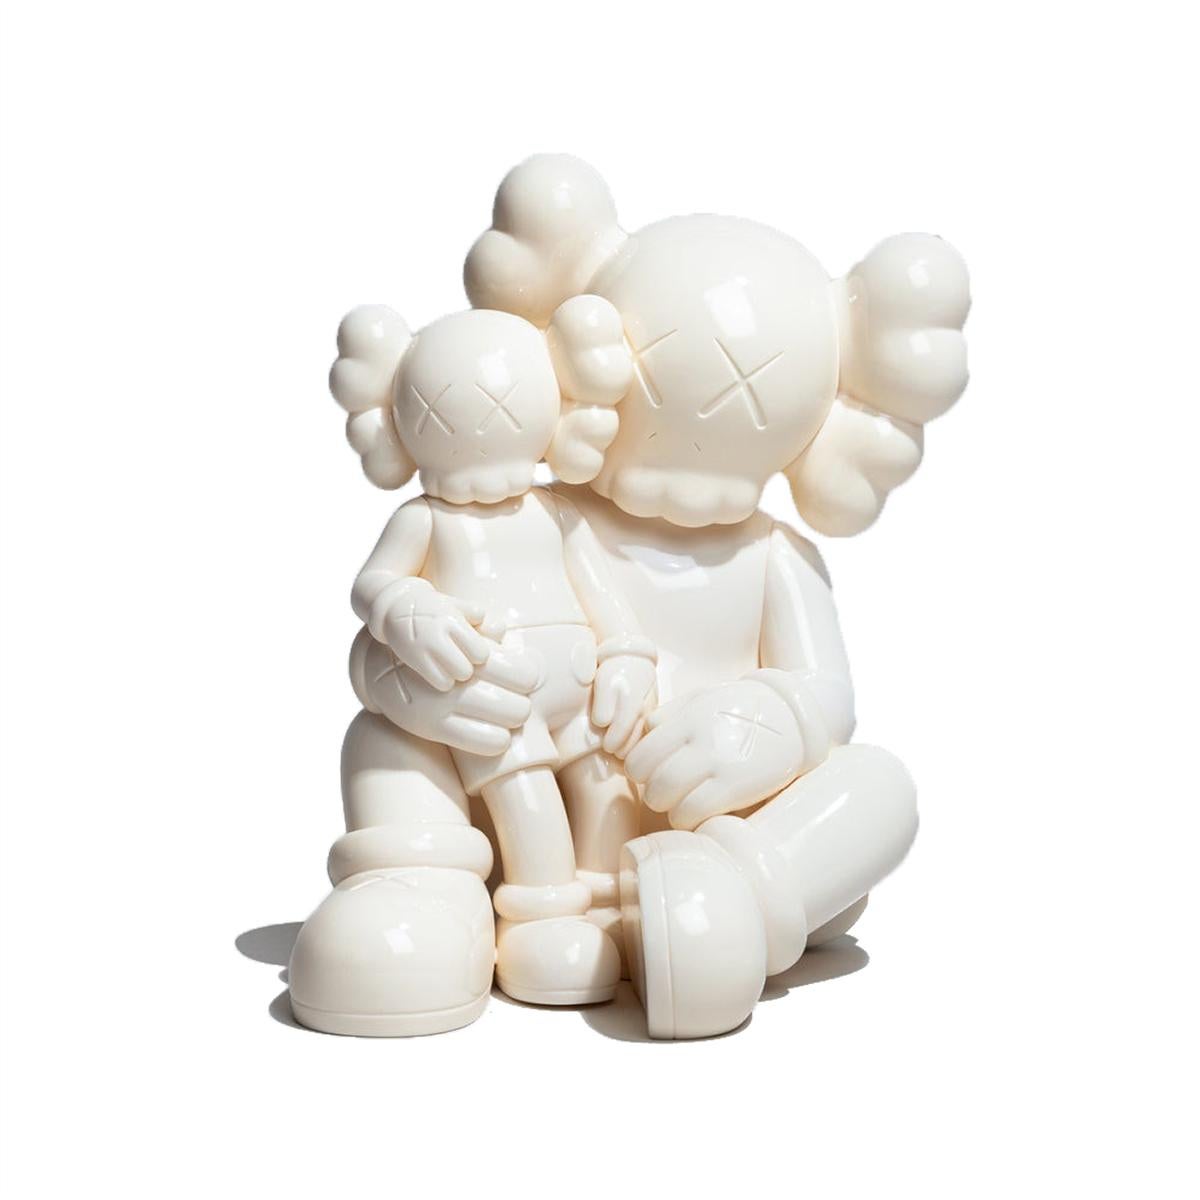 KAWS Holiday Changbai Mountain (KAWS white Changbai): 
A beautifully composed snowy-white KAWS COMPANION published to commemorate KAWS' larger-scale sculpture of same, at Changbai Mountain in Jilin Province, China. The piece features the signature